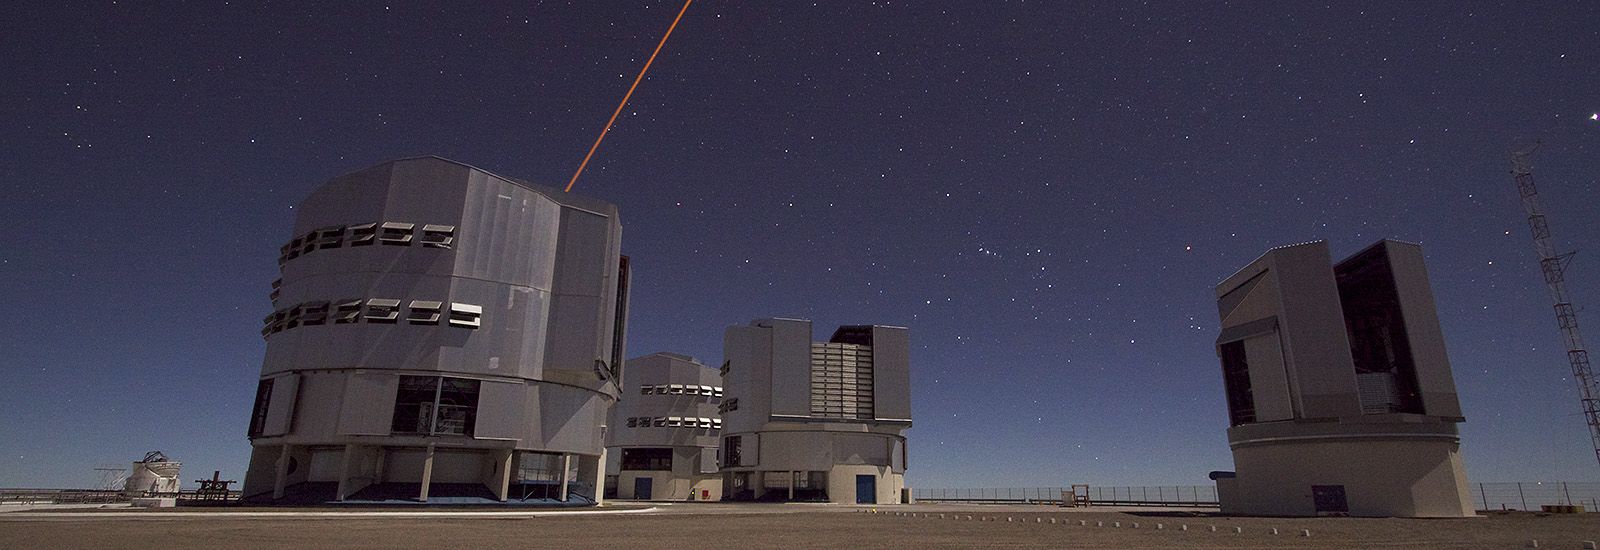 The Very Large Telescope in Chile at night